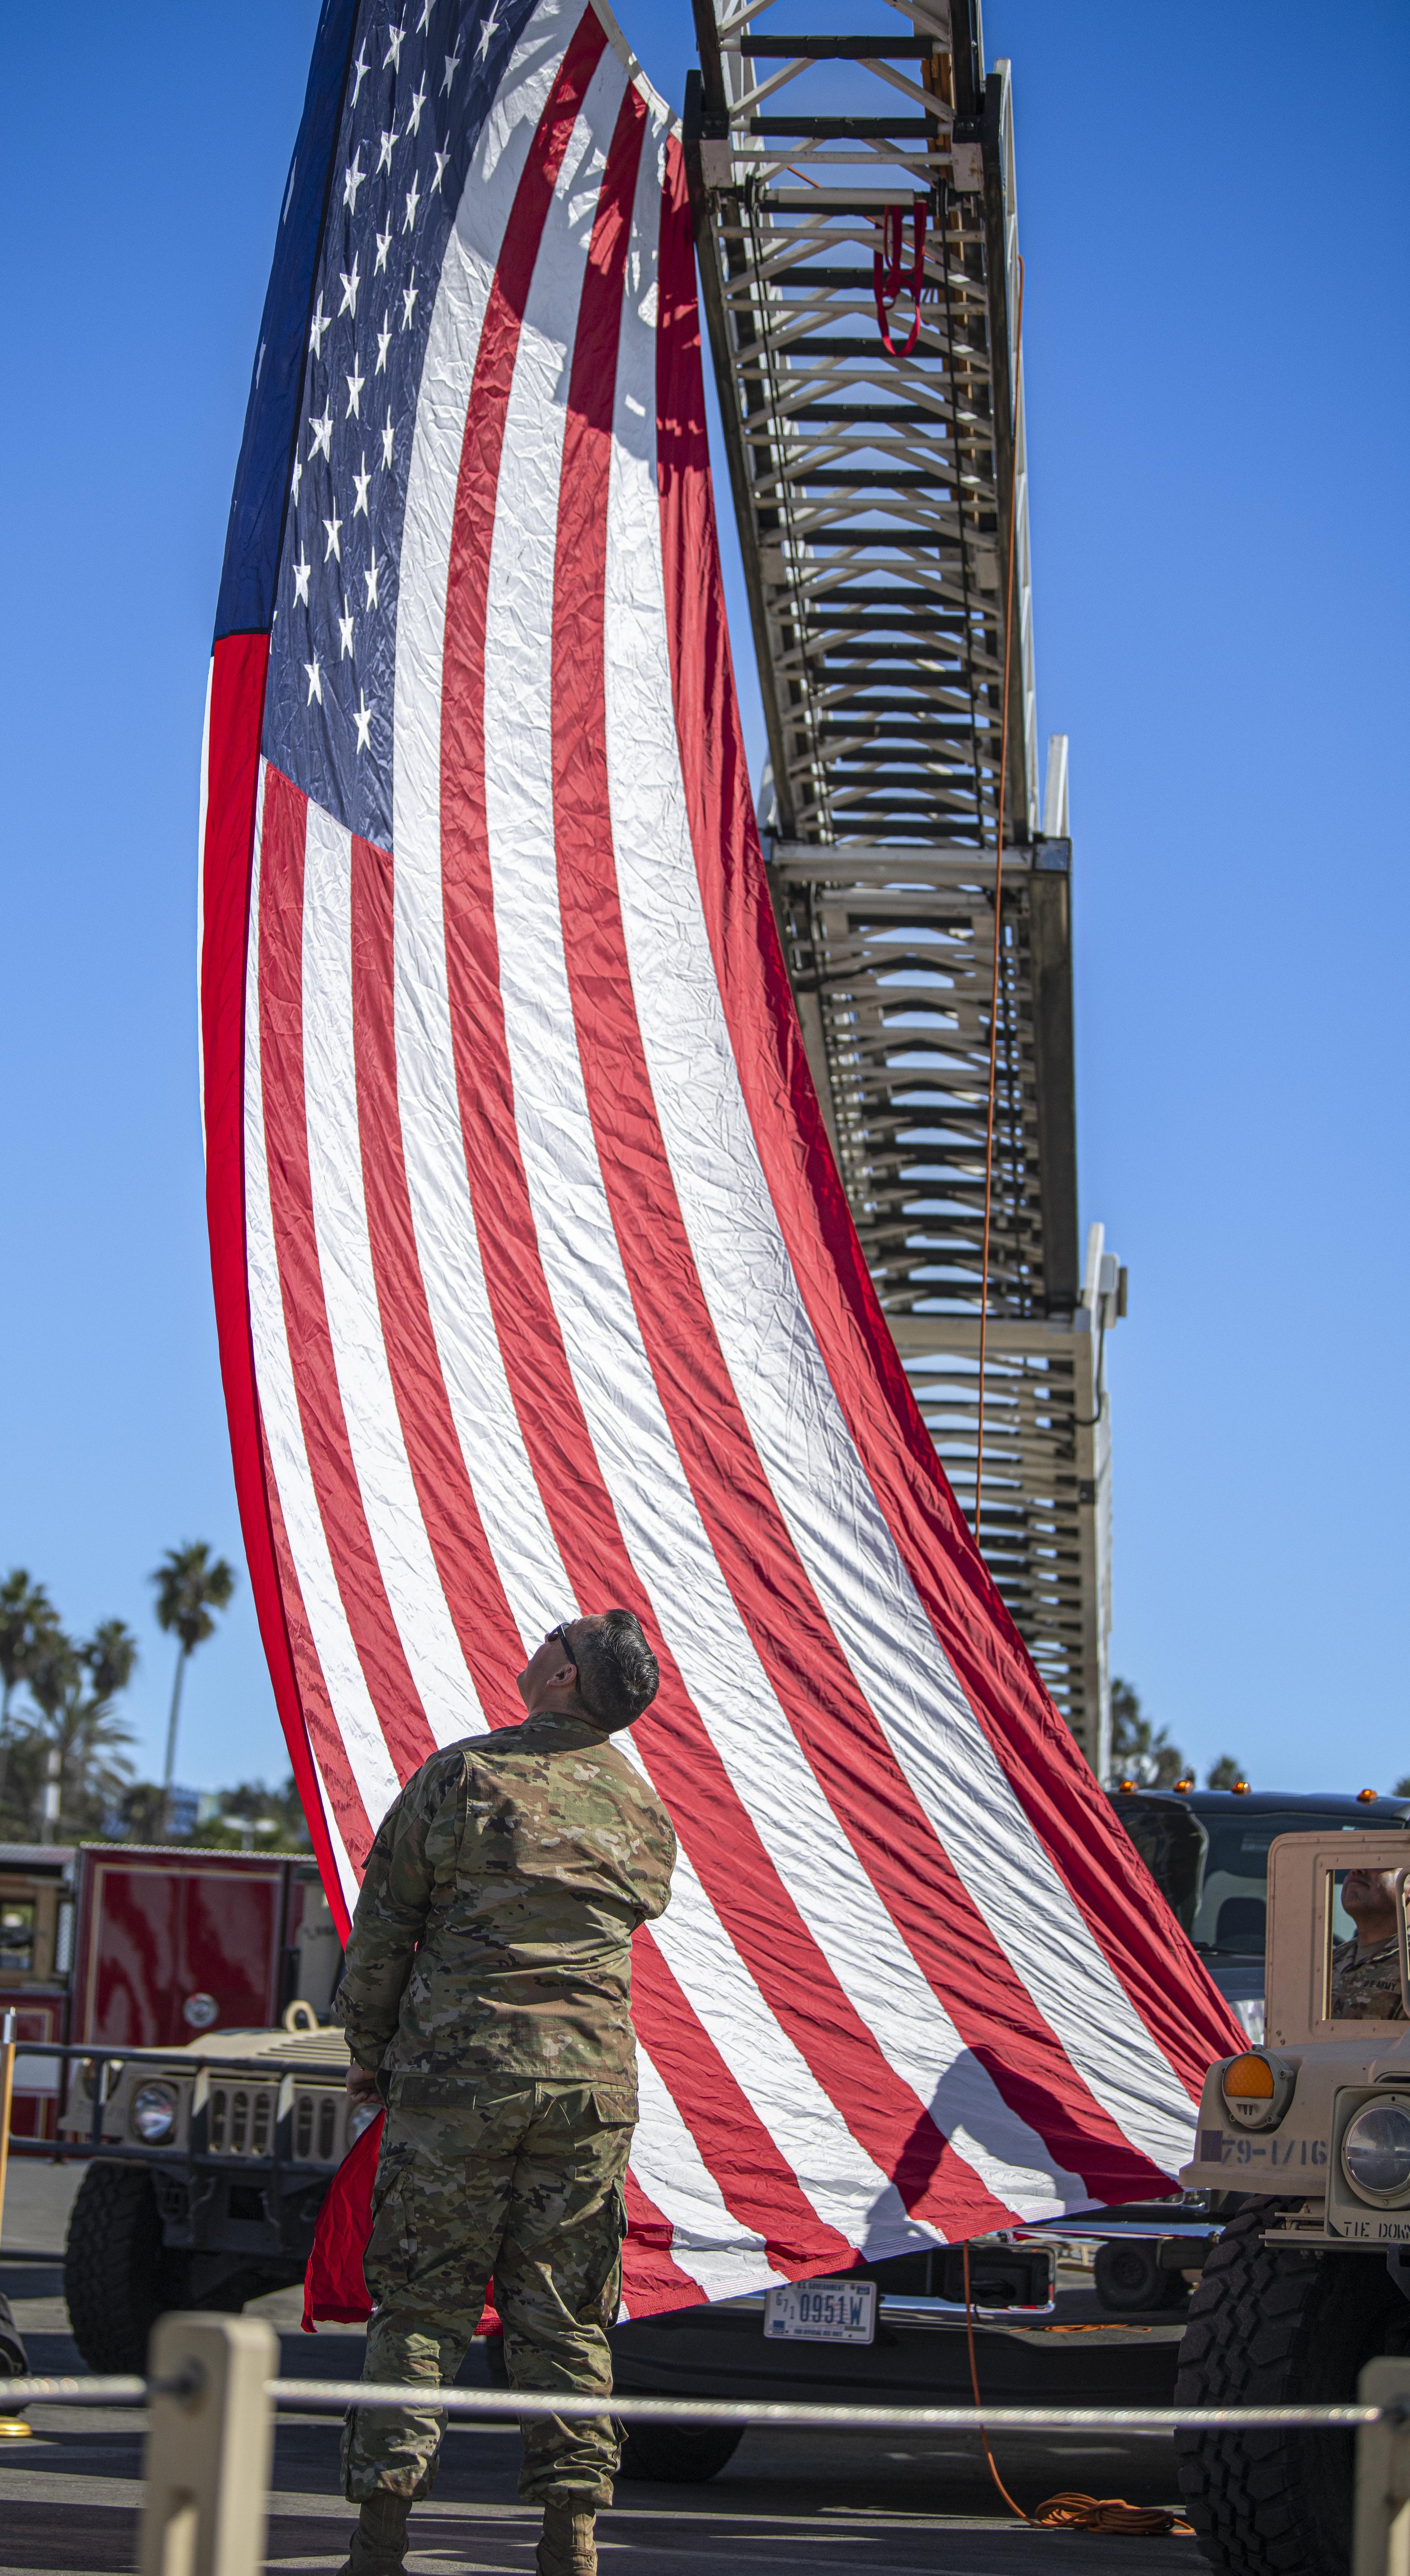  A Califonia National Gaurd soldier  holds the enlarged American flag steady while other soldiers help secure the flag at the Veterans Day event held by both the Los Angeles Army Recruitment Battalion and the California Army National Gaurd on Nov. 11